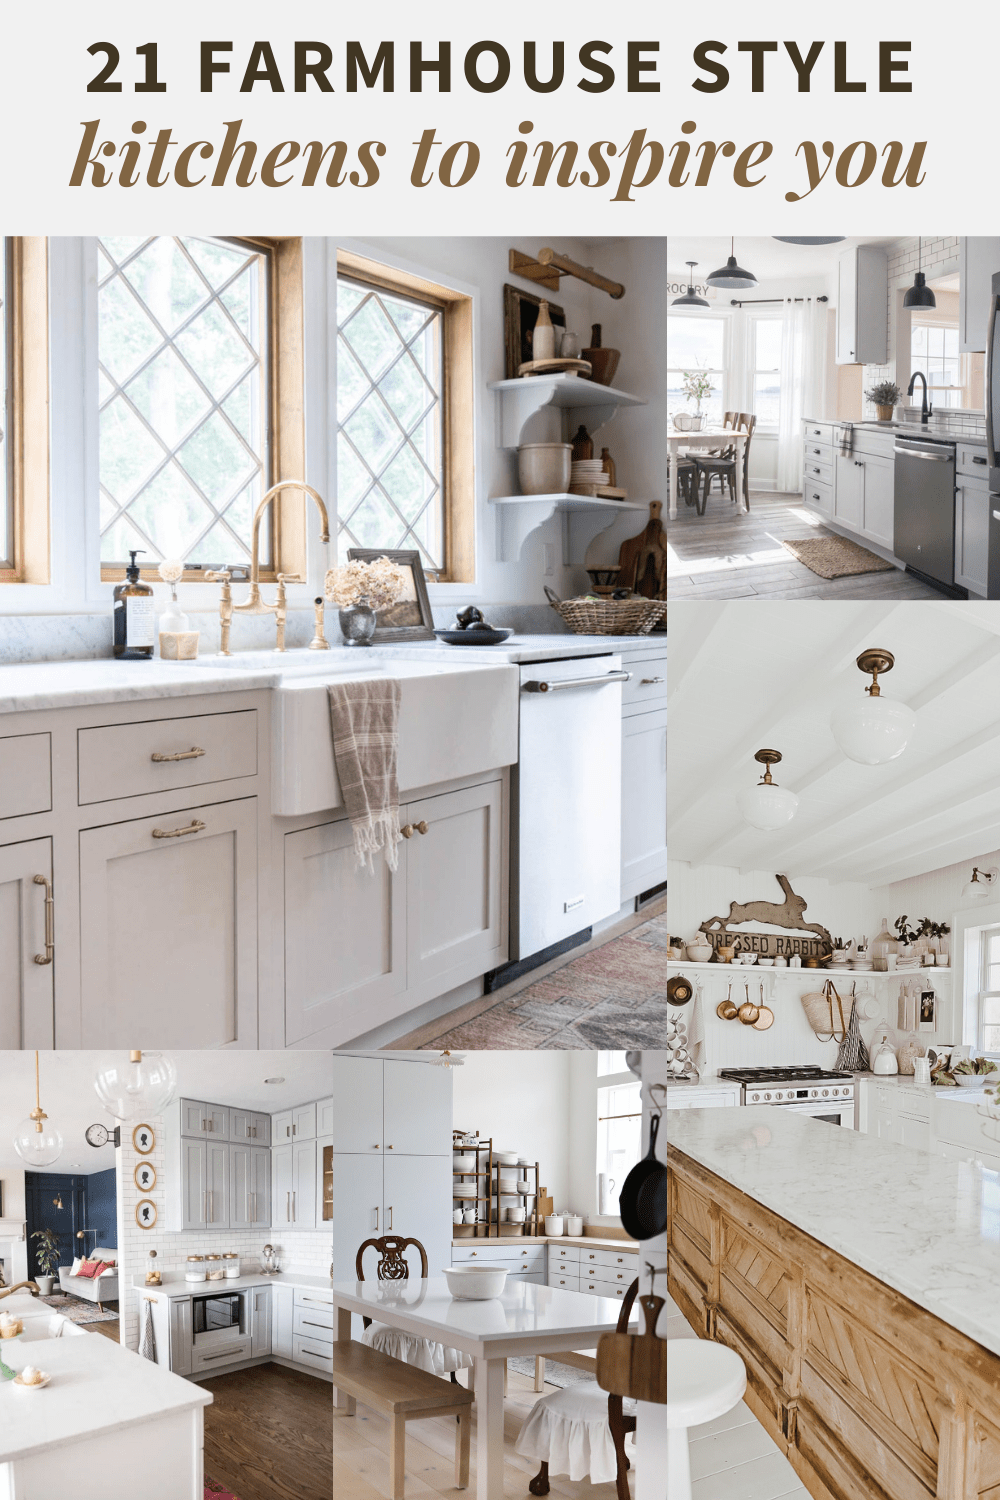 20+ Inspiring Farmhouse Style Kitchens from DIY Bloggers